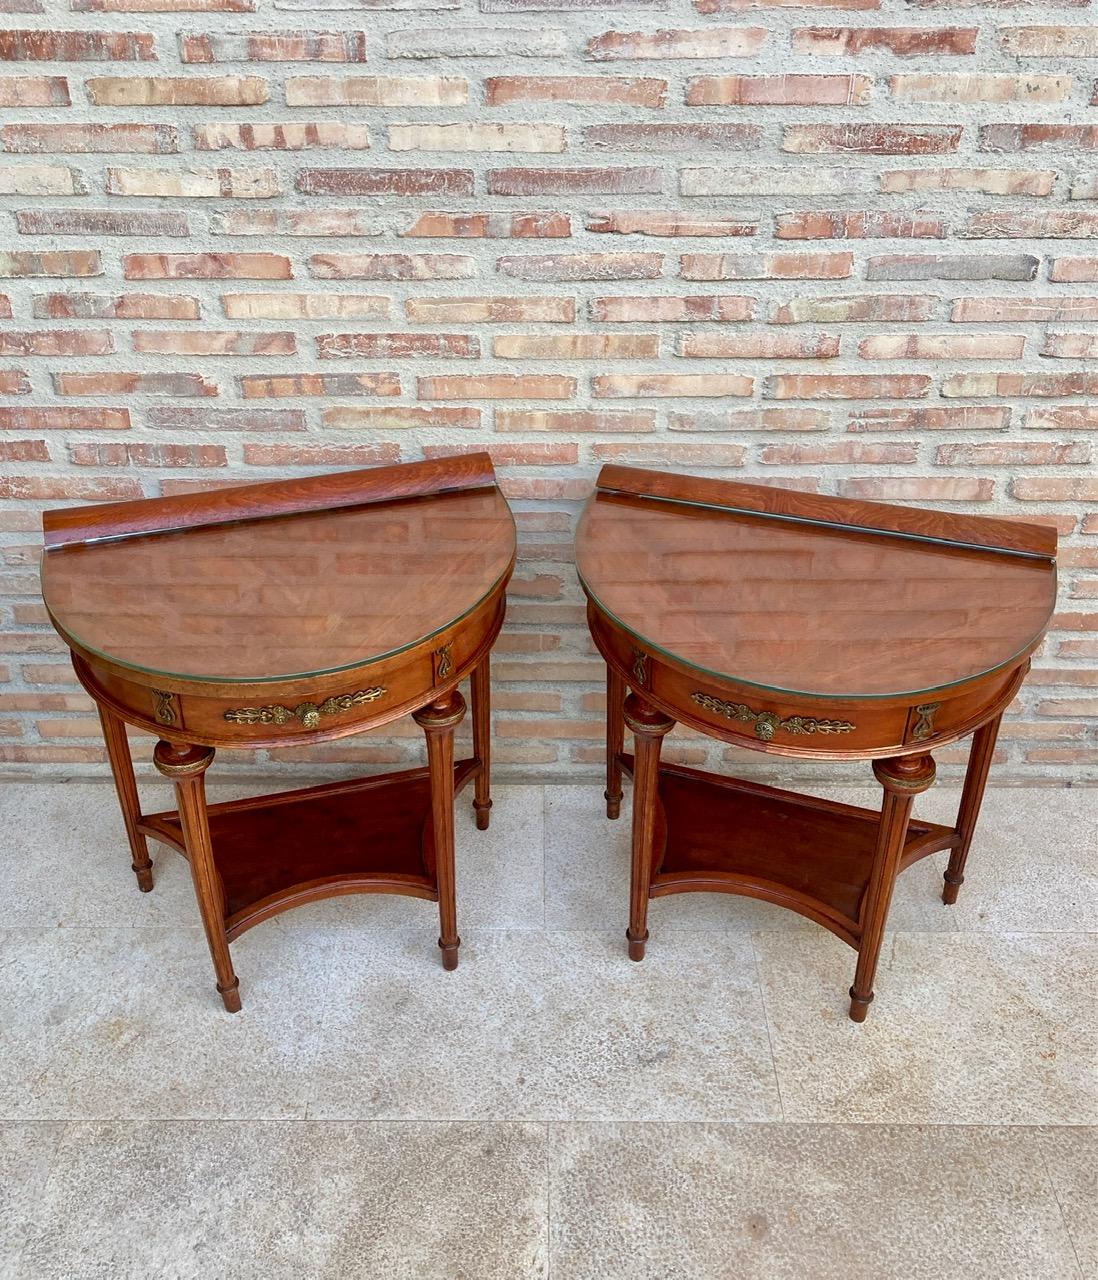 Beautiful pair of 1930s empire style mahogany nightstands. 
They are shaped like a half moon and two legs give elegance and typical style of their time. They also have a central drawer ideal for storing small items. 
It also has a very practical